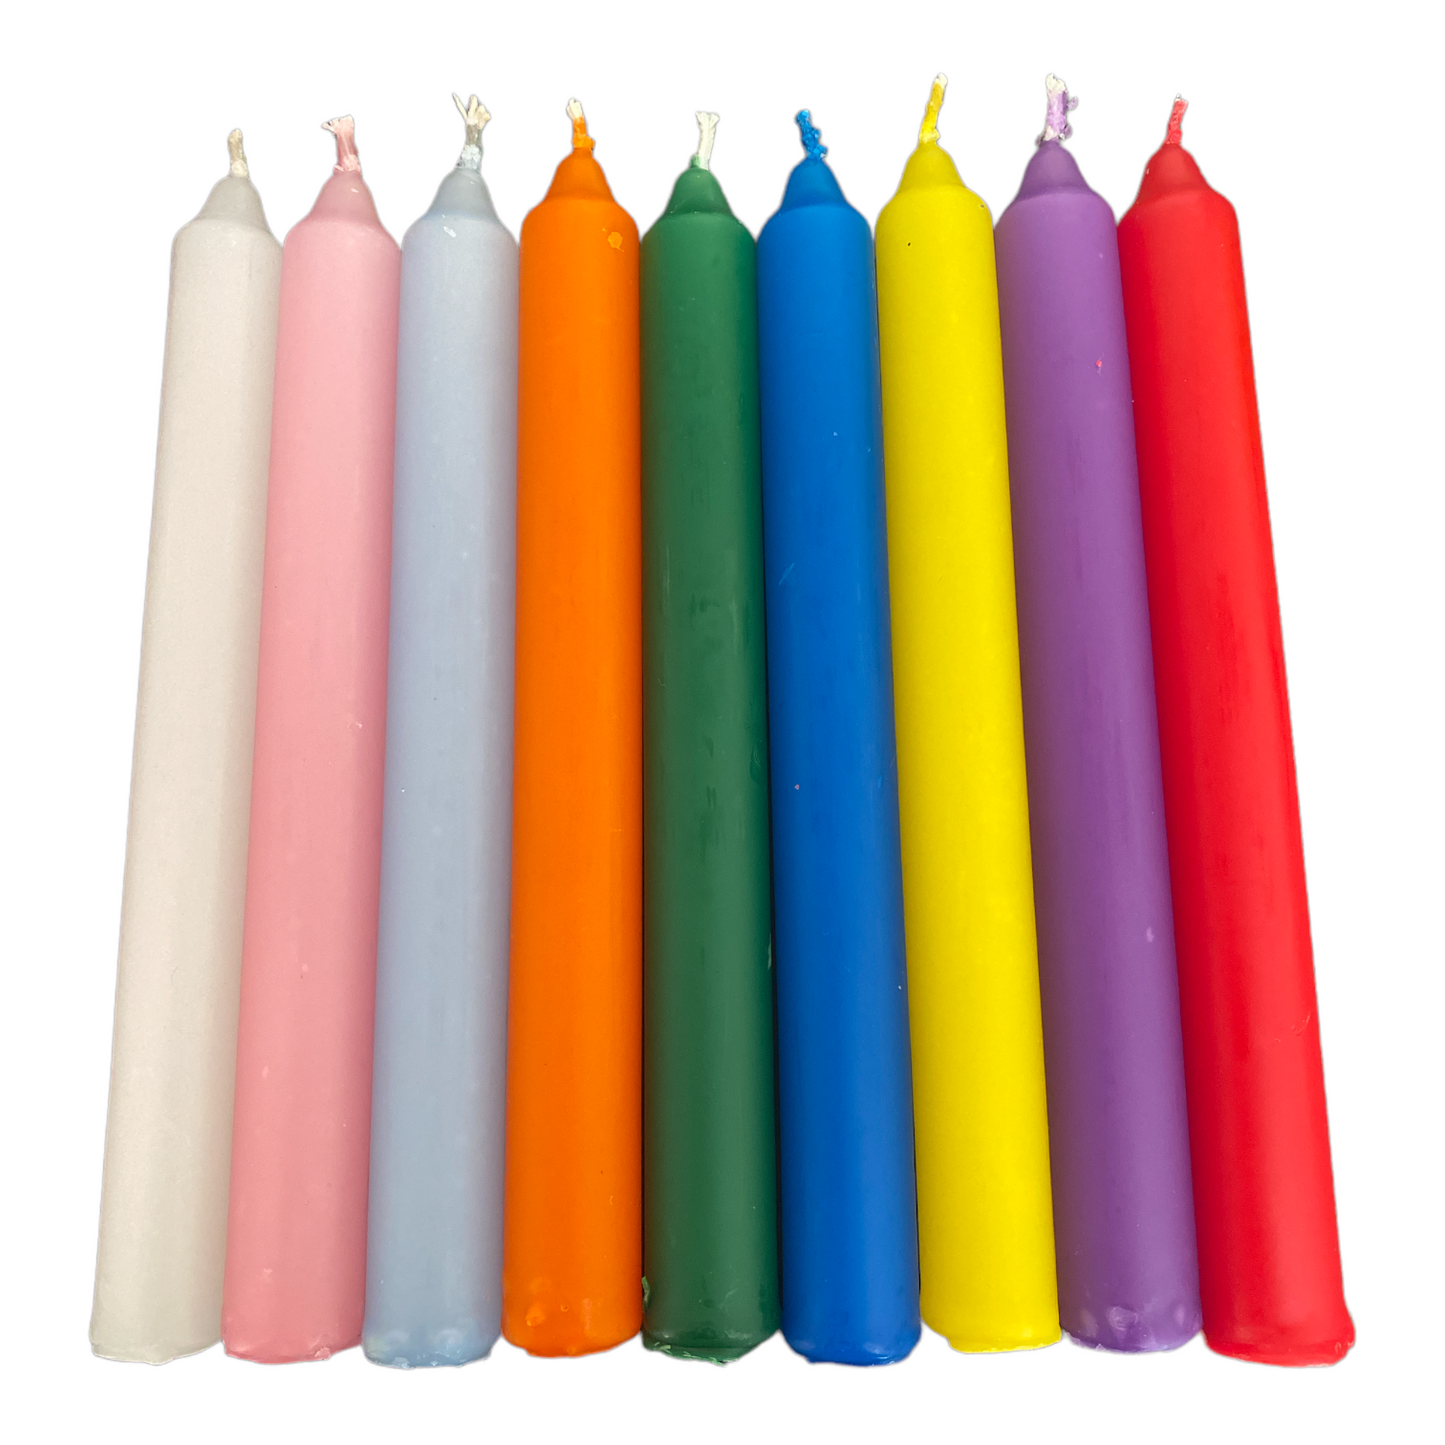 Set of 9 Candles - With Pink